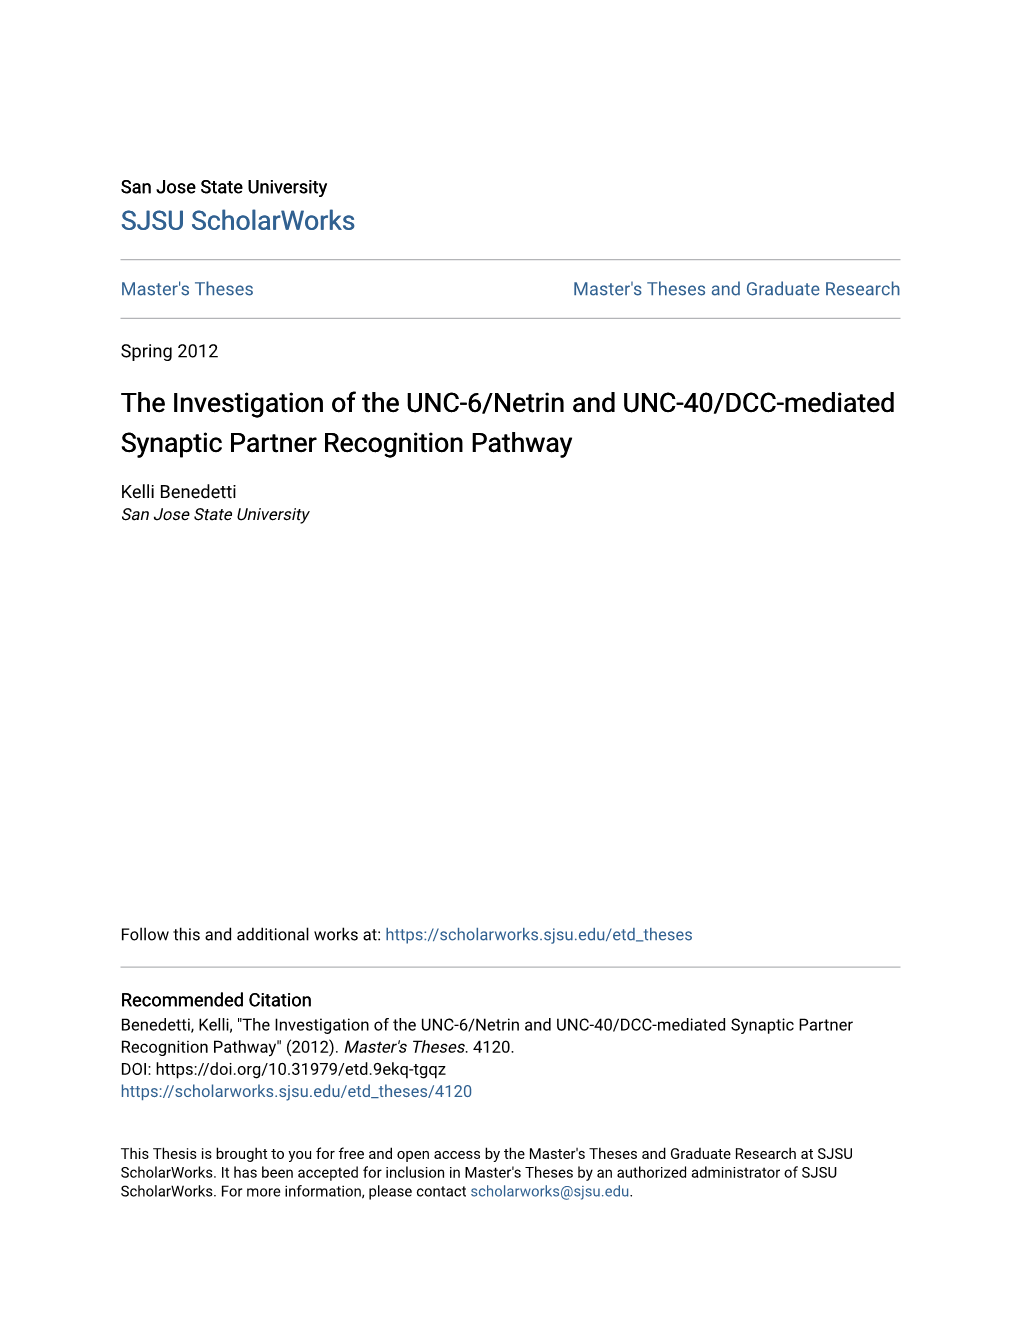 The Investigation of the UNC-6/Netrin and UNC-40/DCC-Mediated Synaptic Partner Recognition Pathway